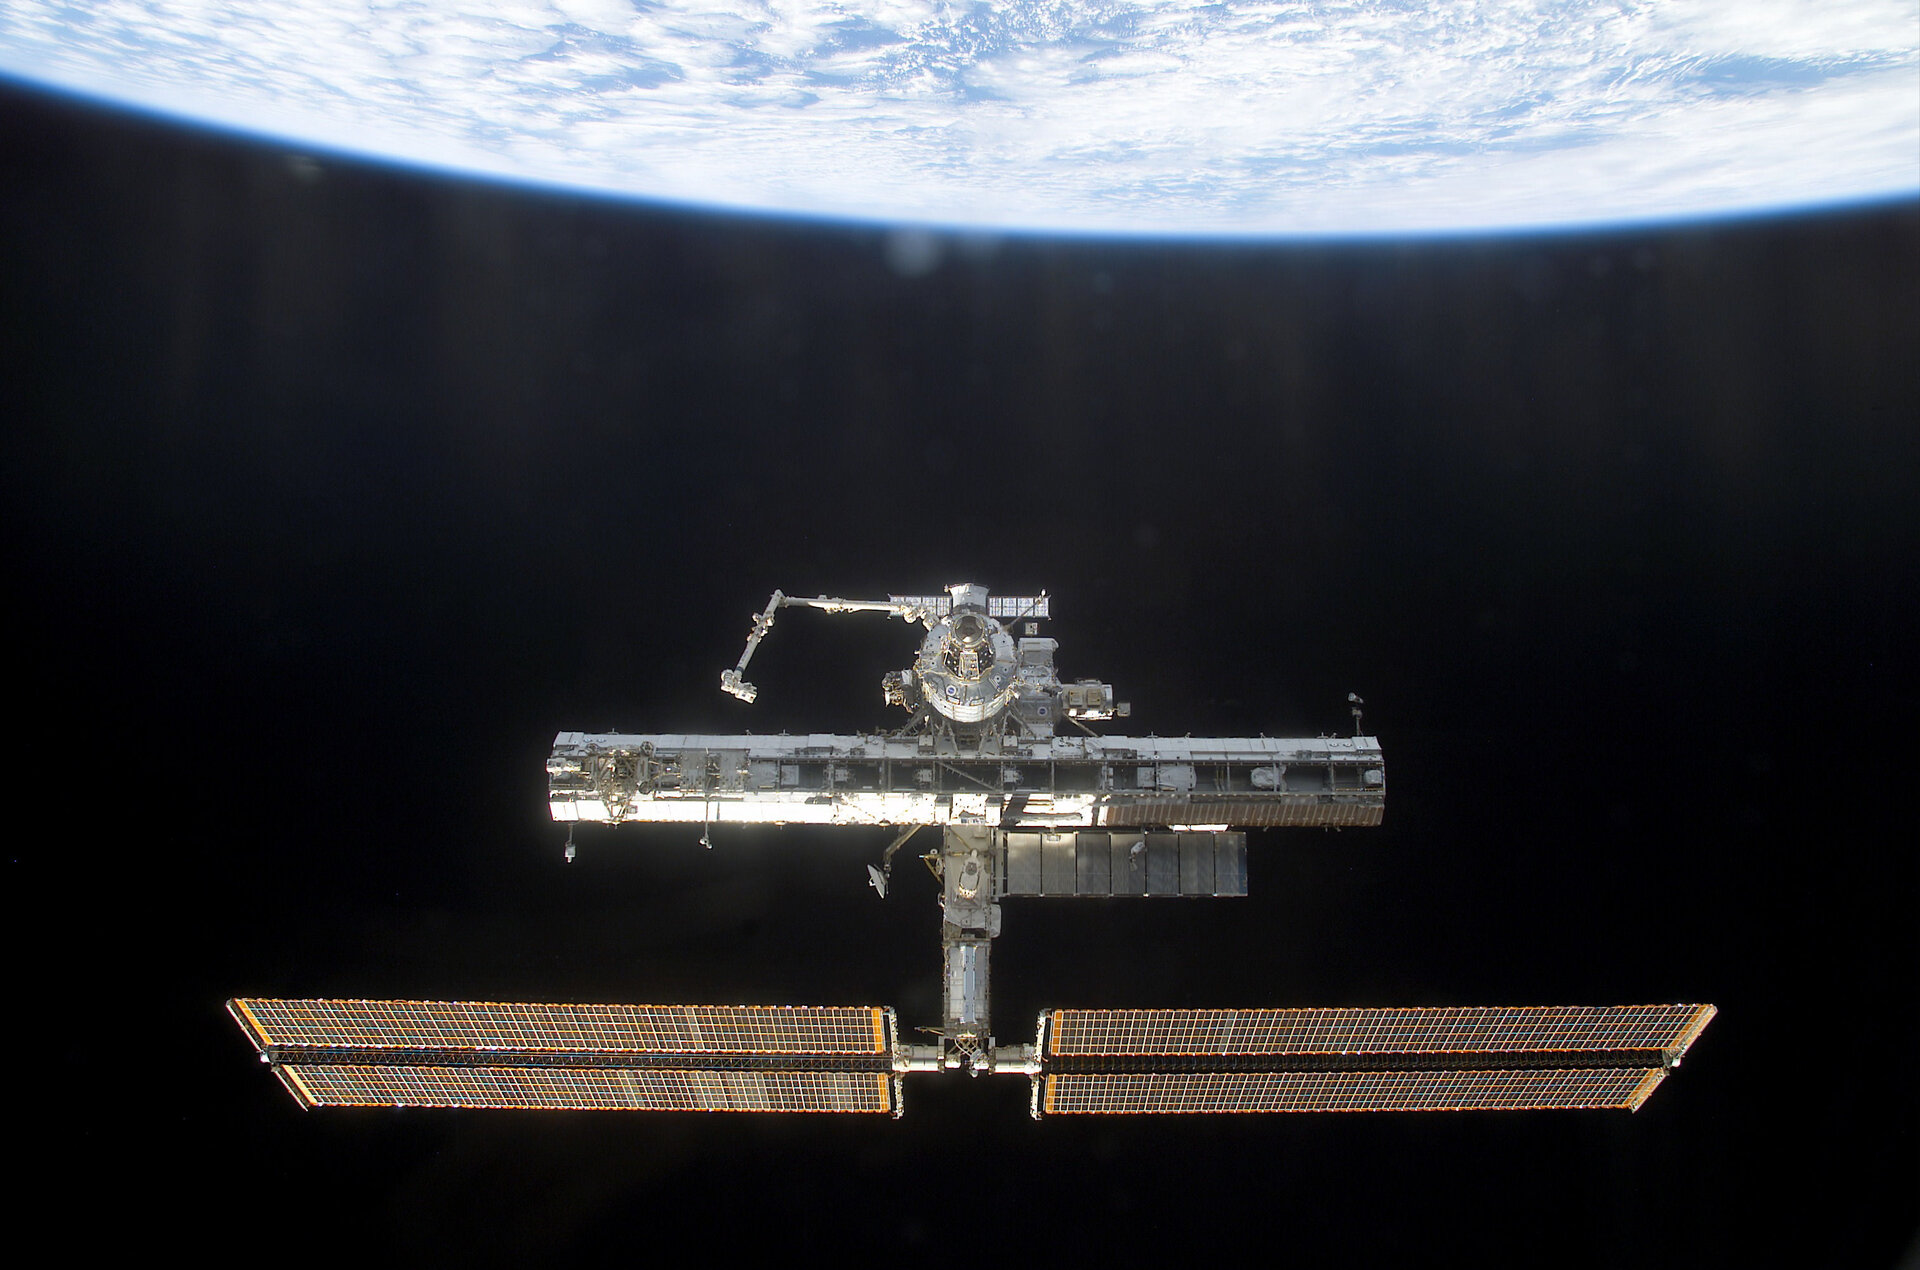 ISS seen from departing STS-113